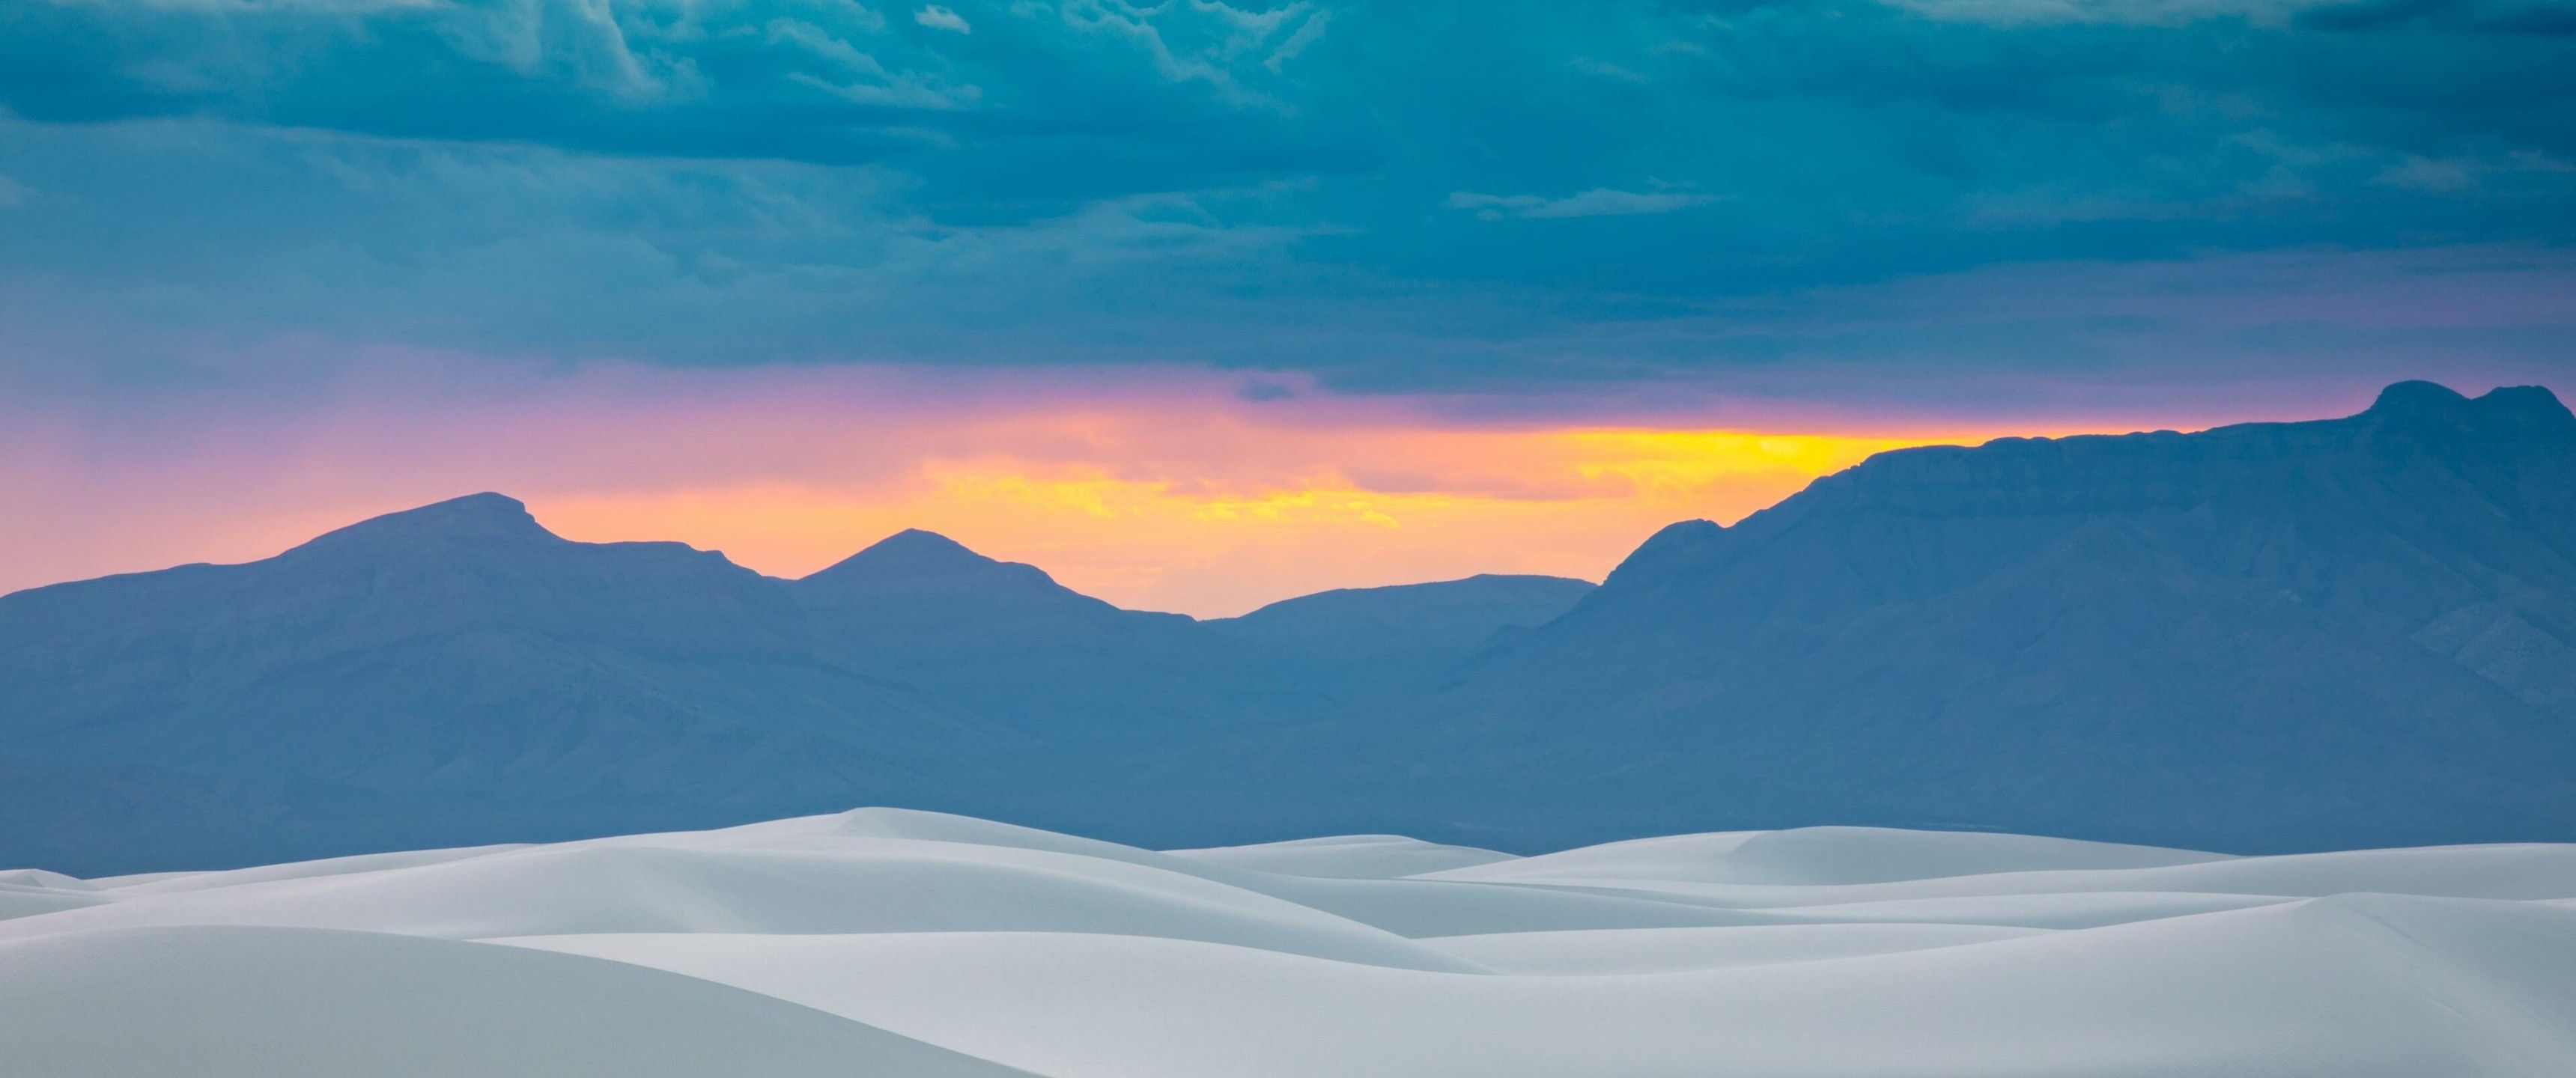 A colorful sunset over the sand dunes in White Sands National Monument. - 3440x1440